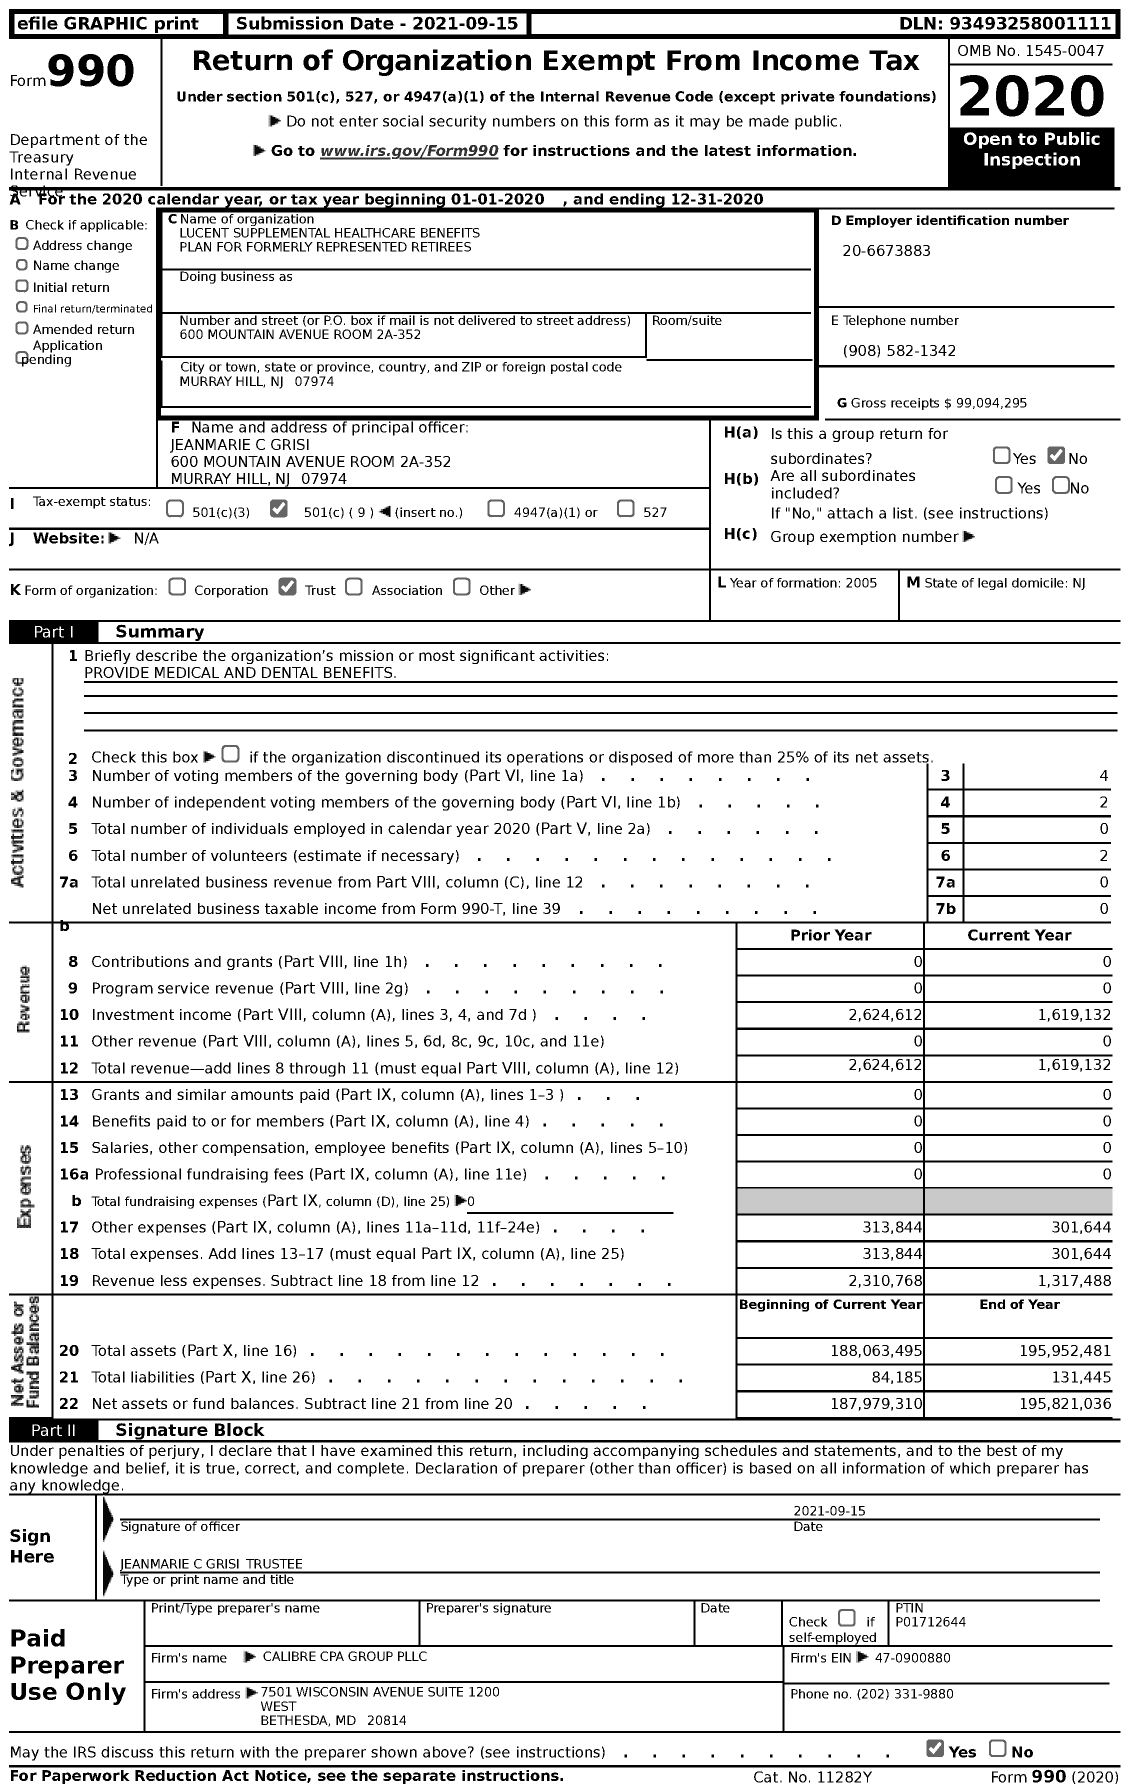 Image of first page of 2020 Form 990 for Lucent Supplemental Healthcare Benefits Plan for